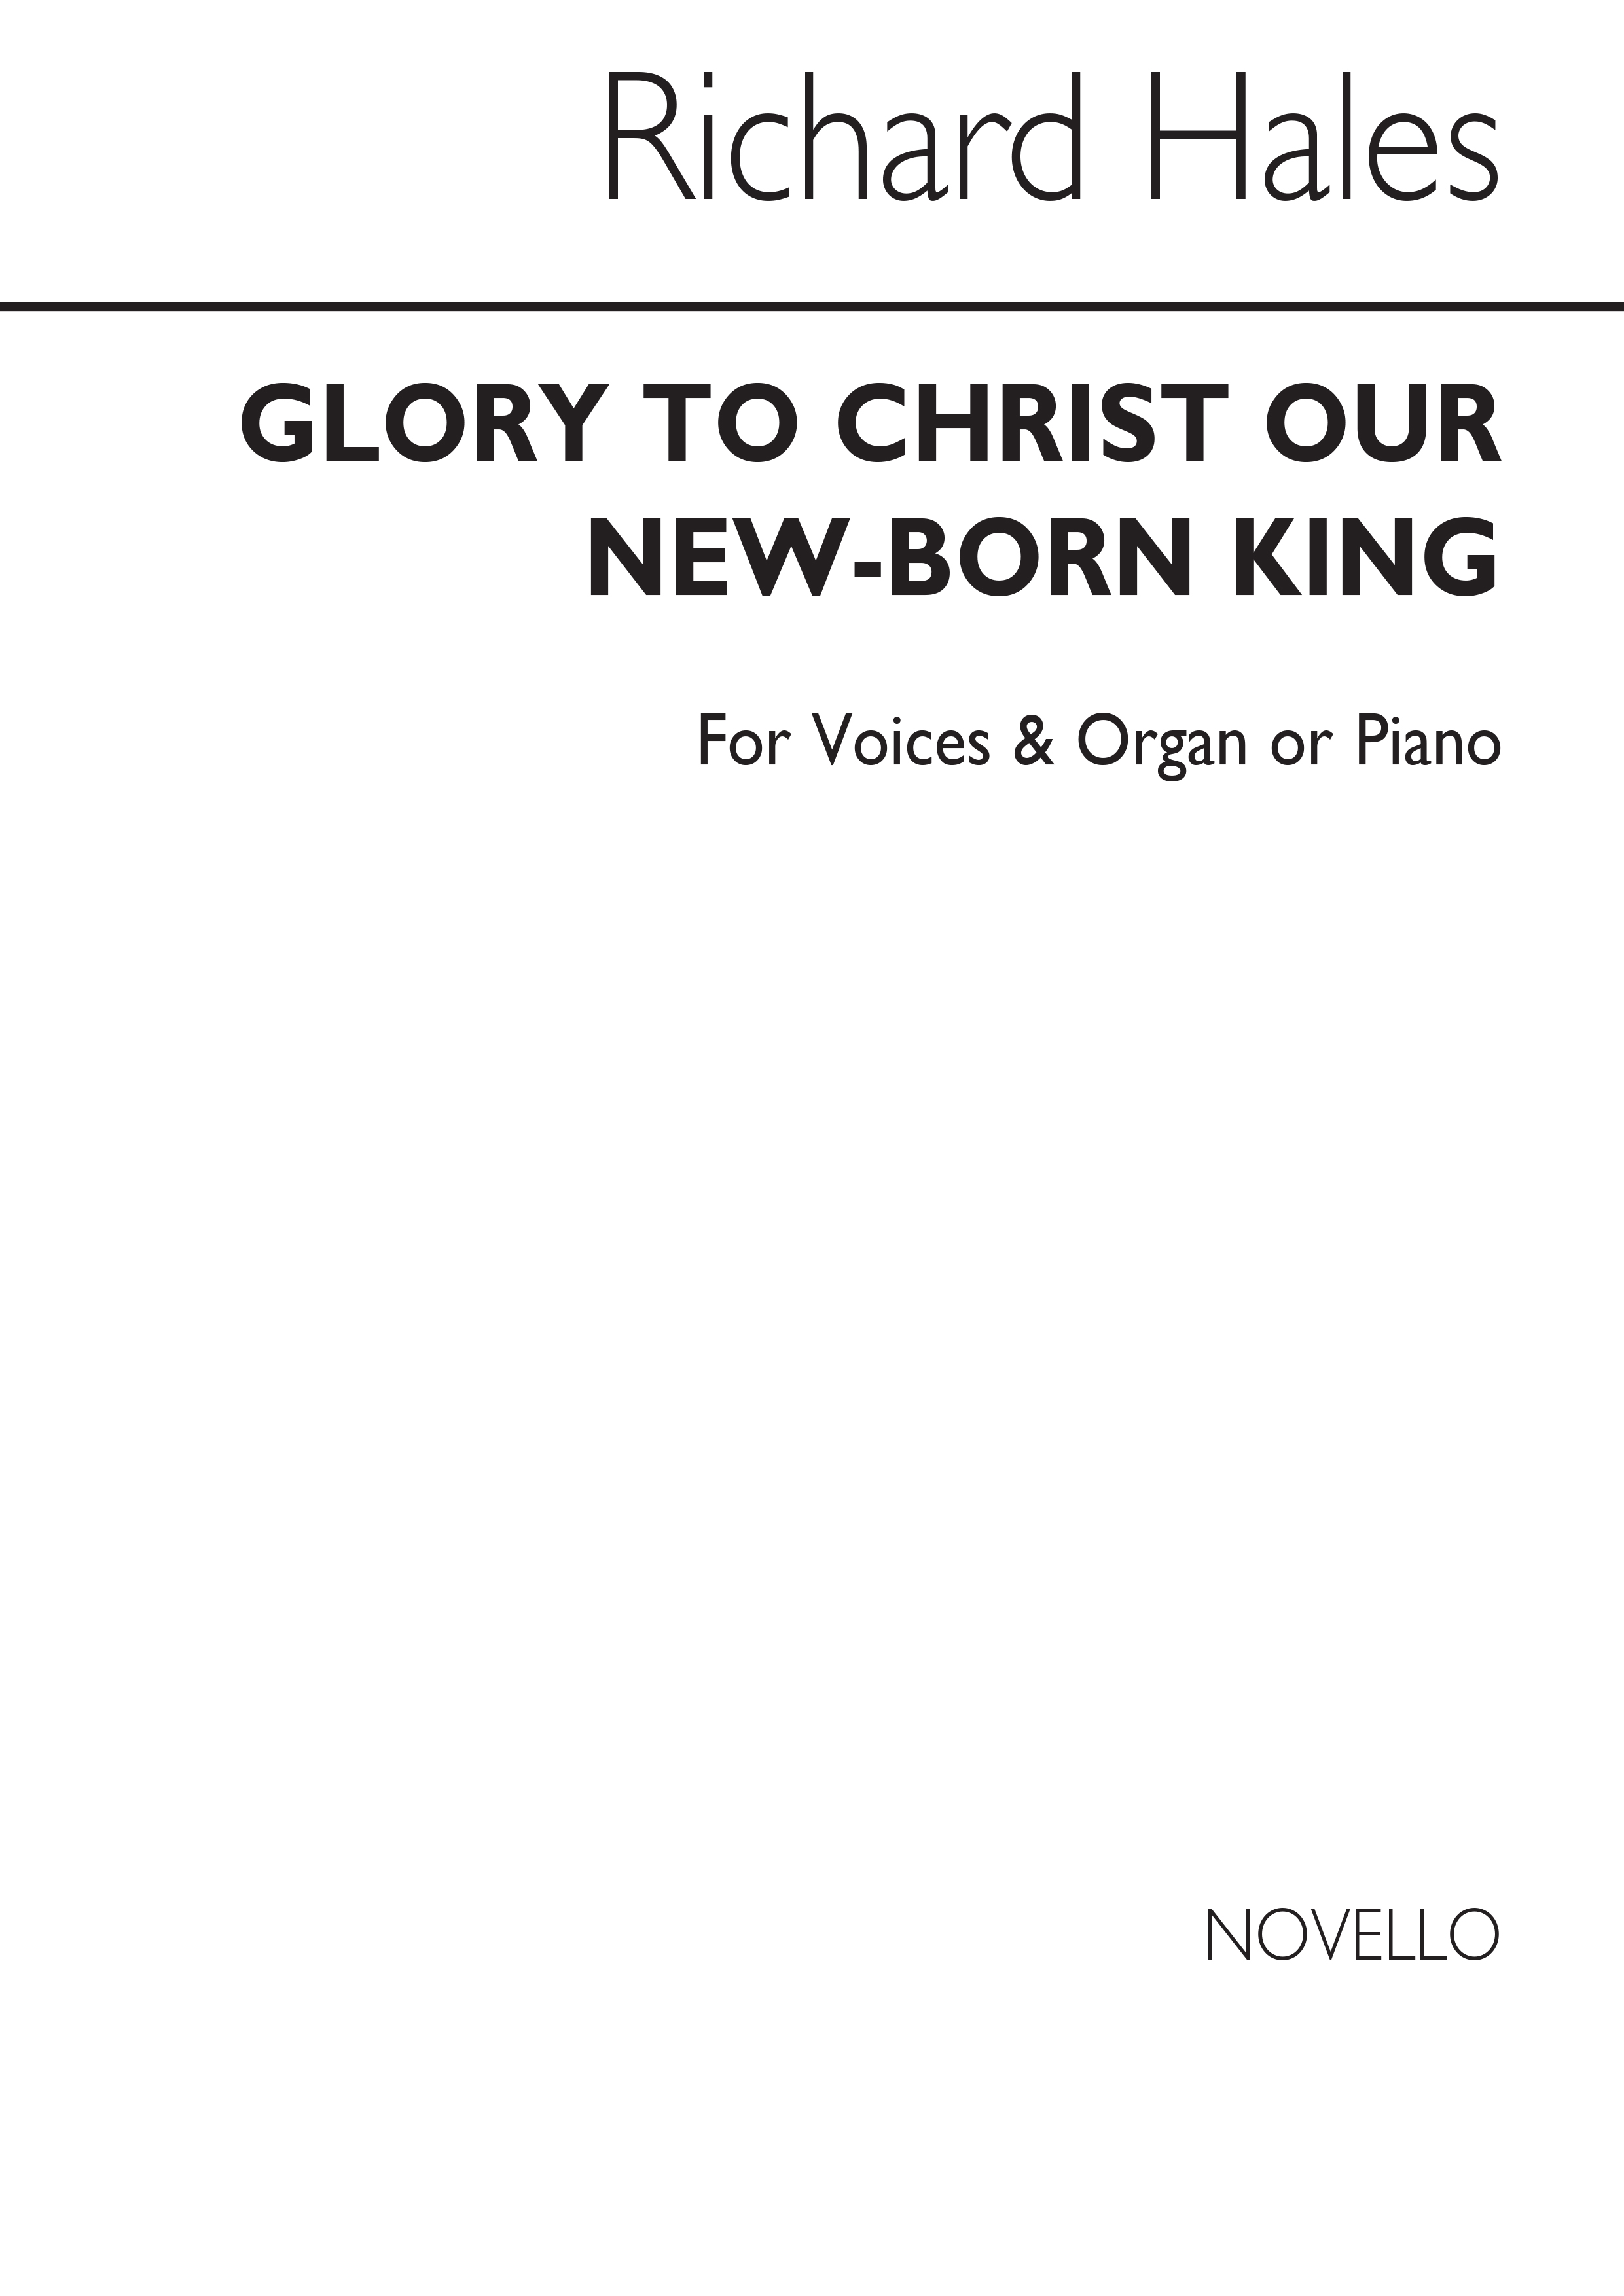 Hales Glory To Christ Our New-born King Satb/unis/org(pf)